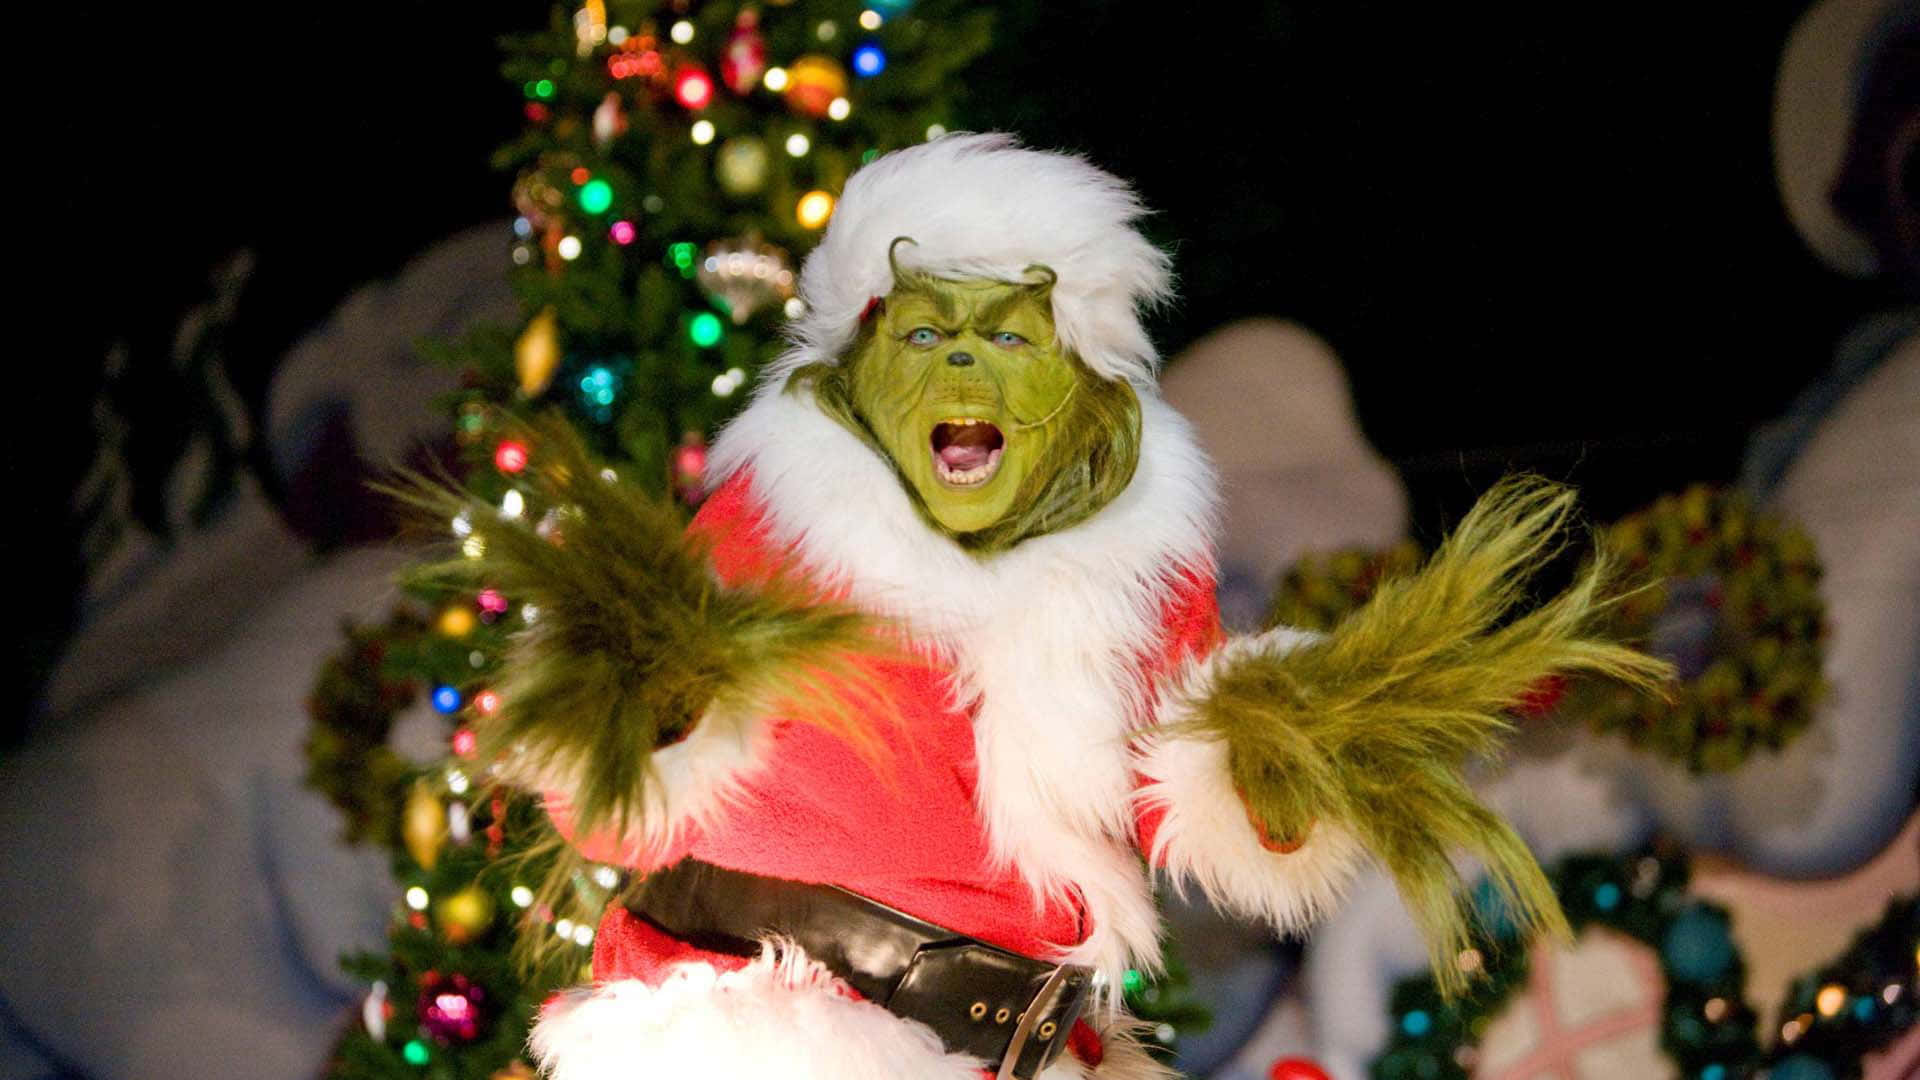 "Bringing the Christmas cheer to everyone, even the Grinch!"